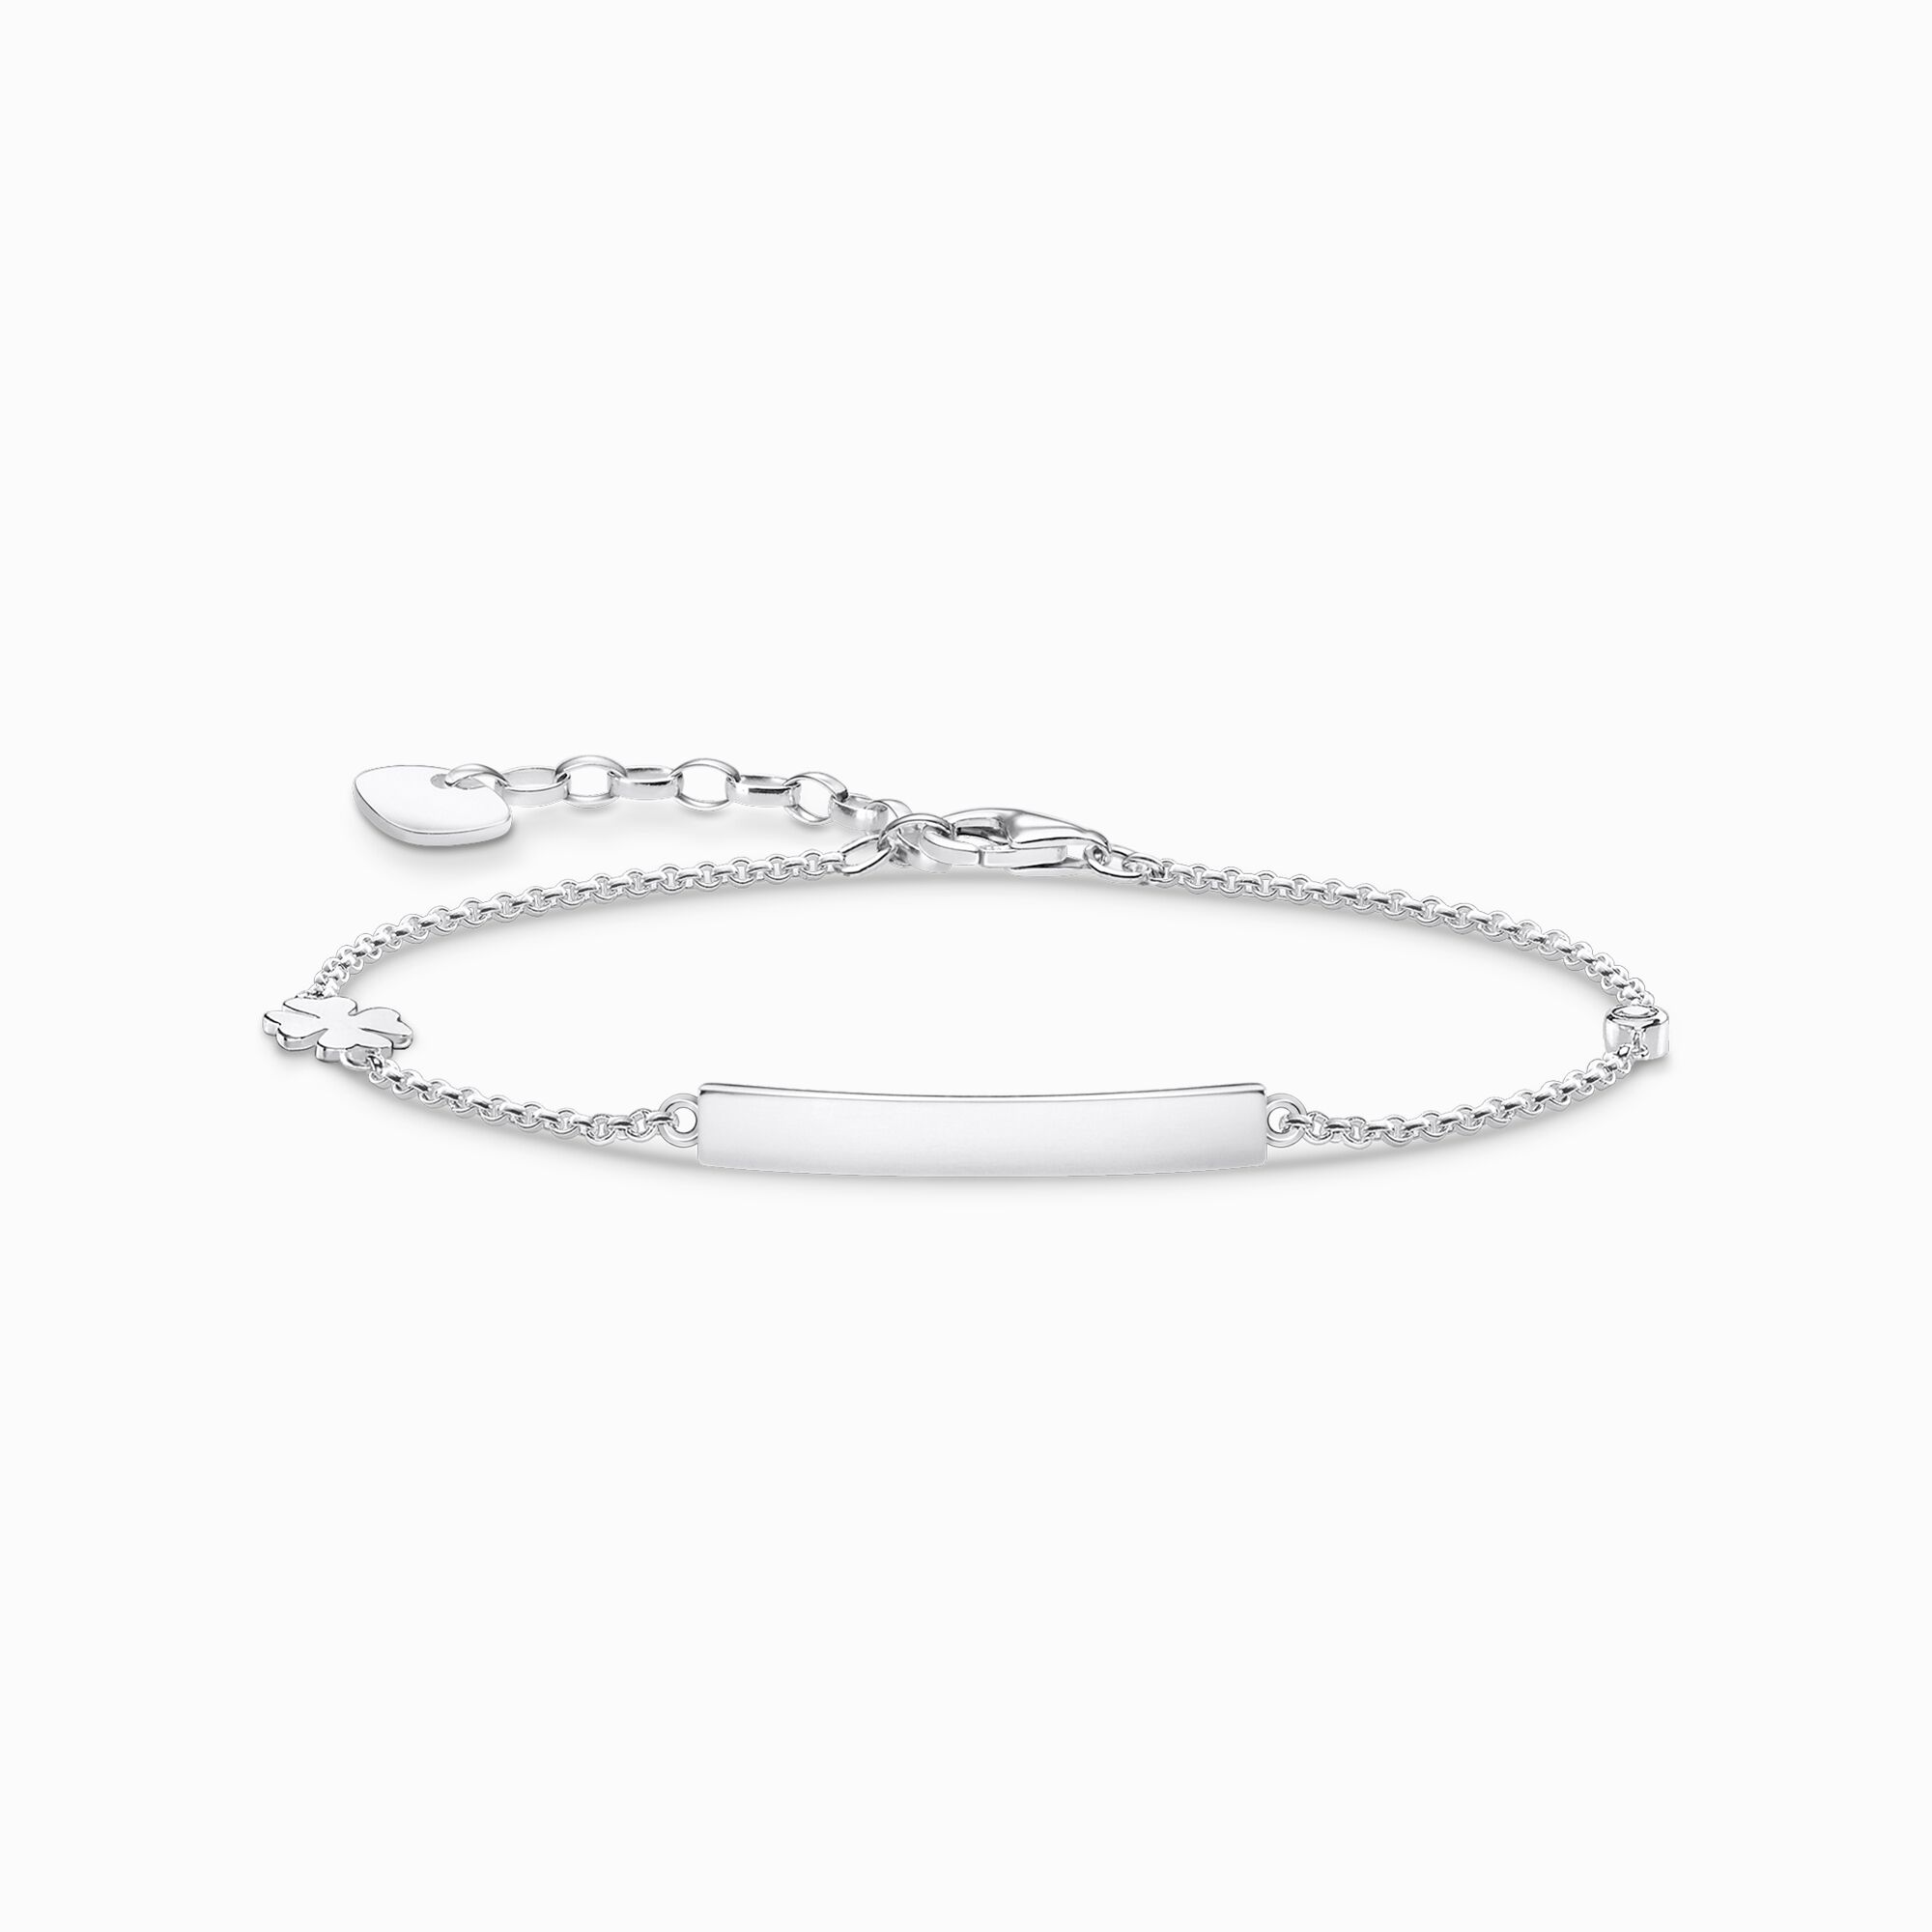 Bracelet classic with cloverleaf and white stone from the  collection in the THOMAS SABO online store